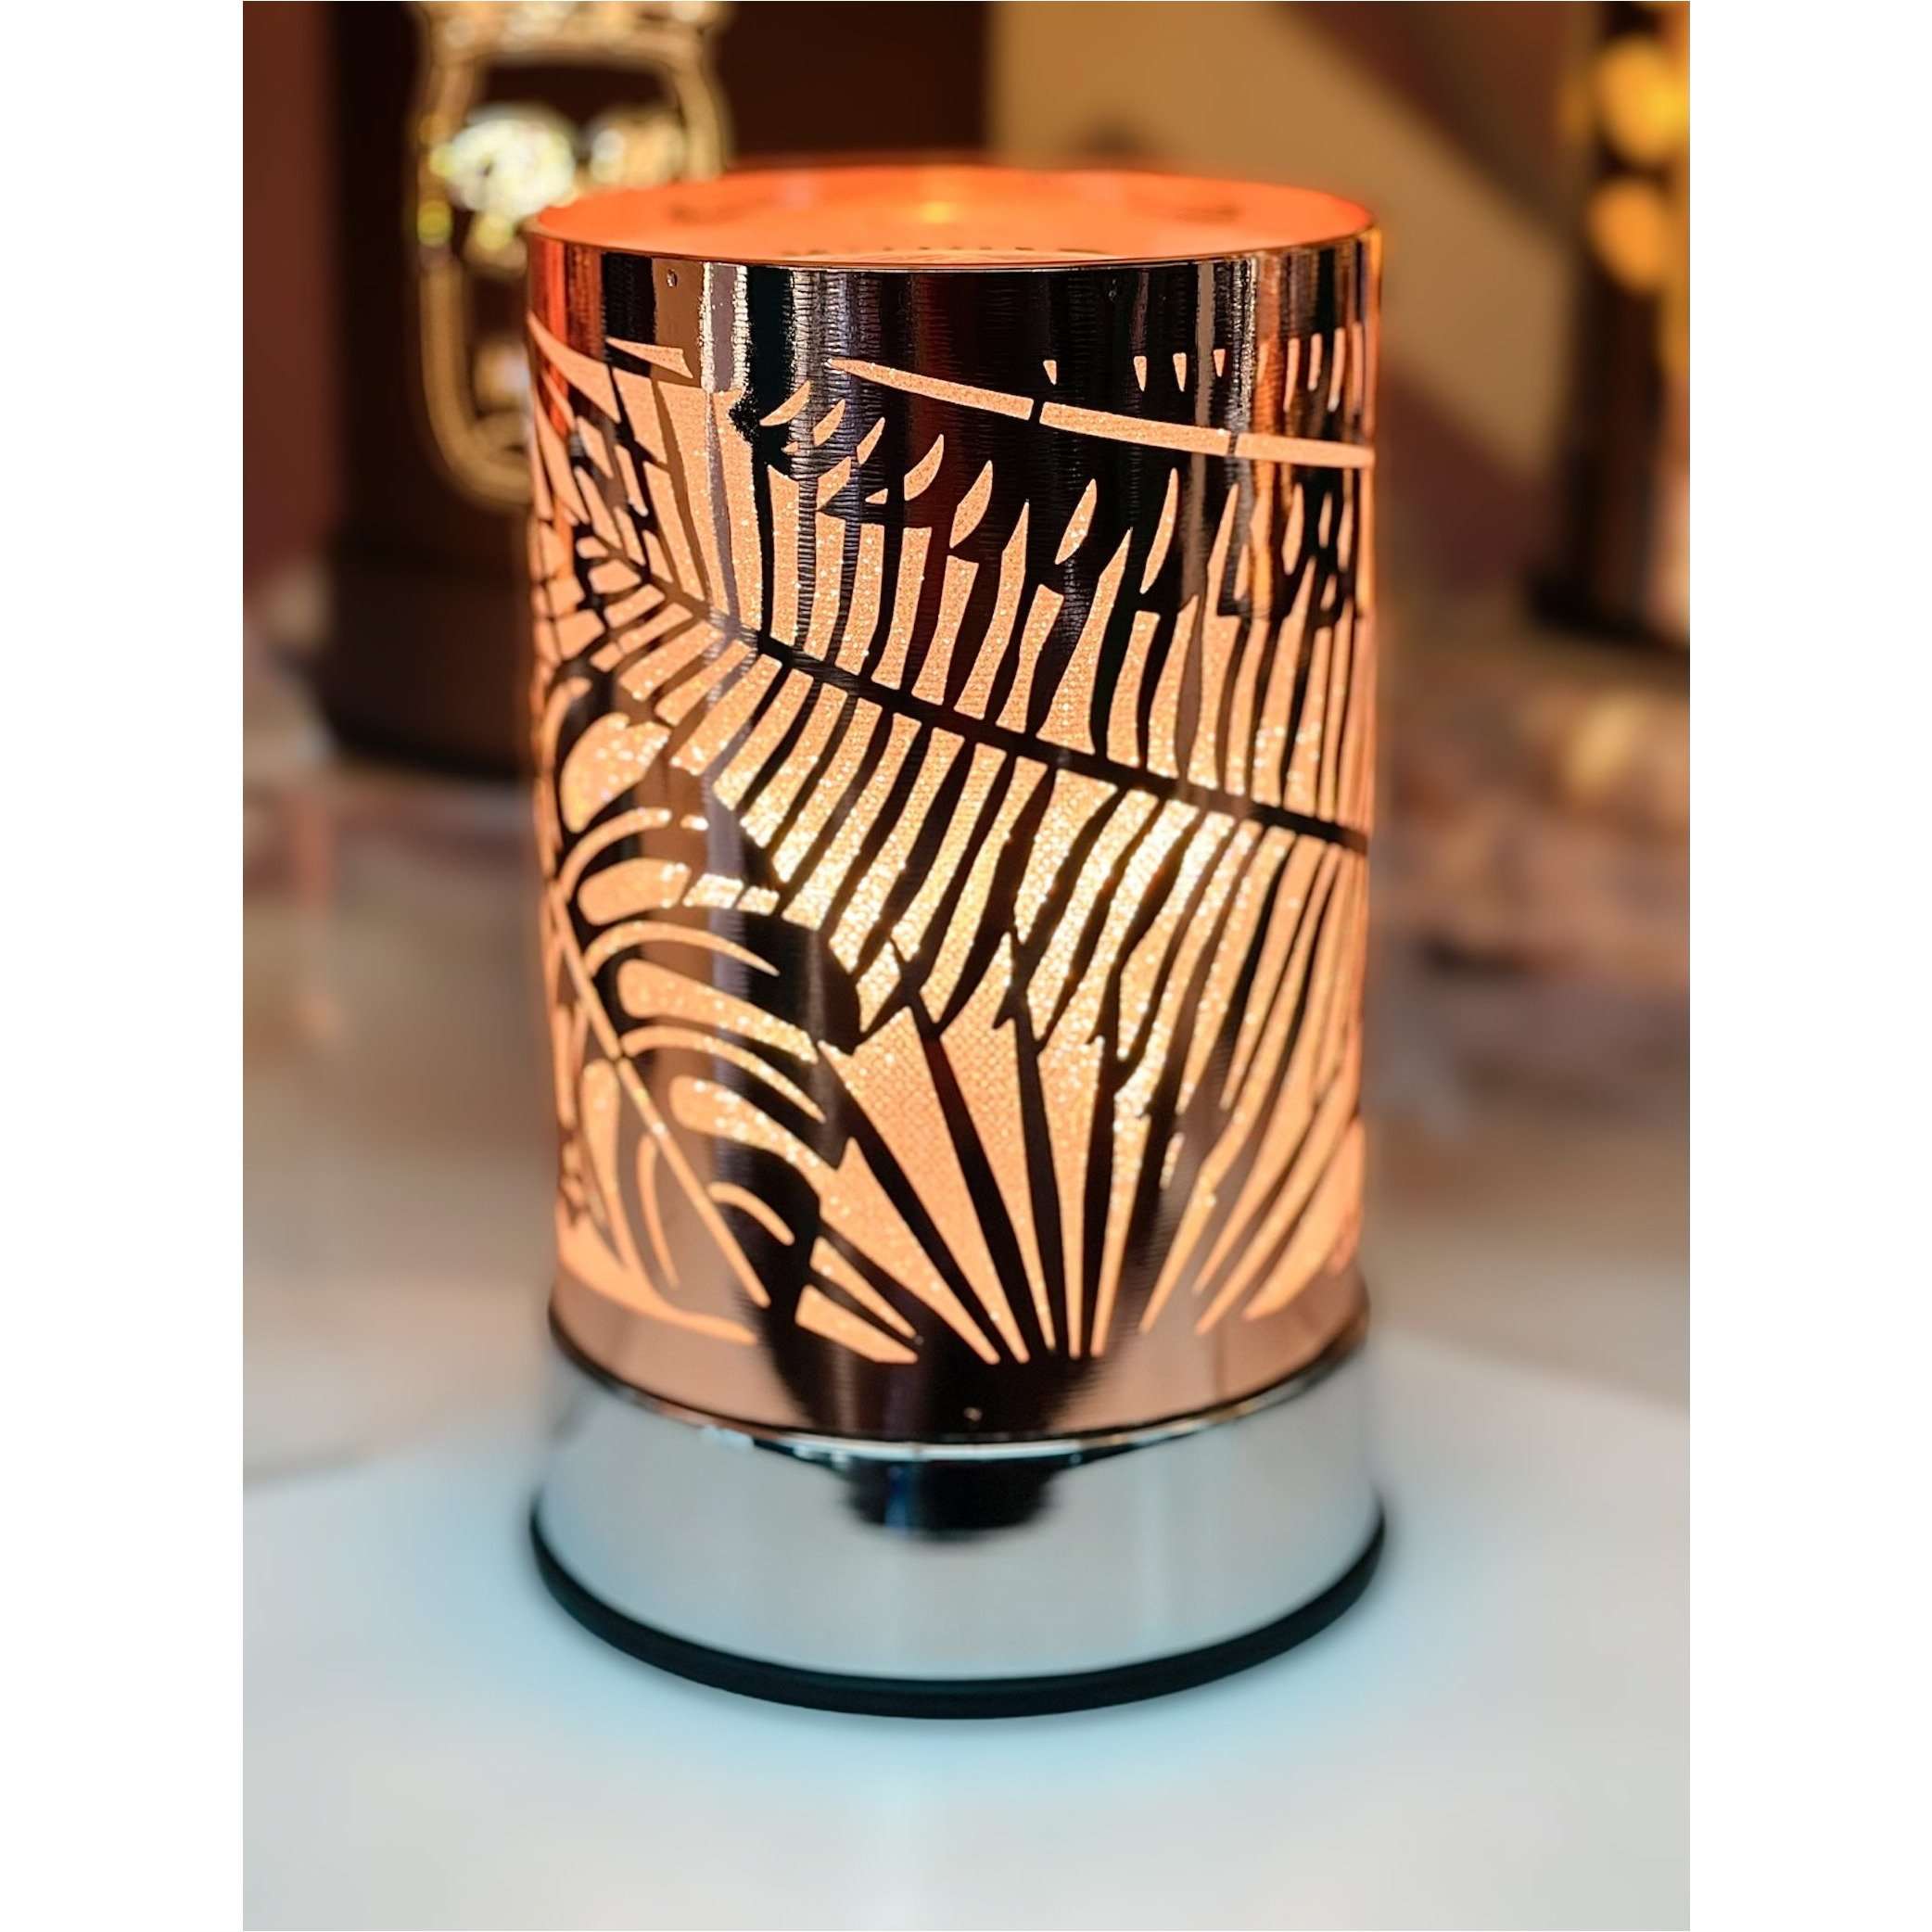 Tropical Palms Scentchips Touch Lantern Warmer